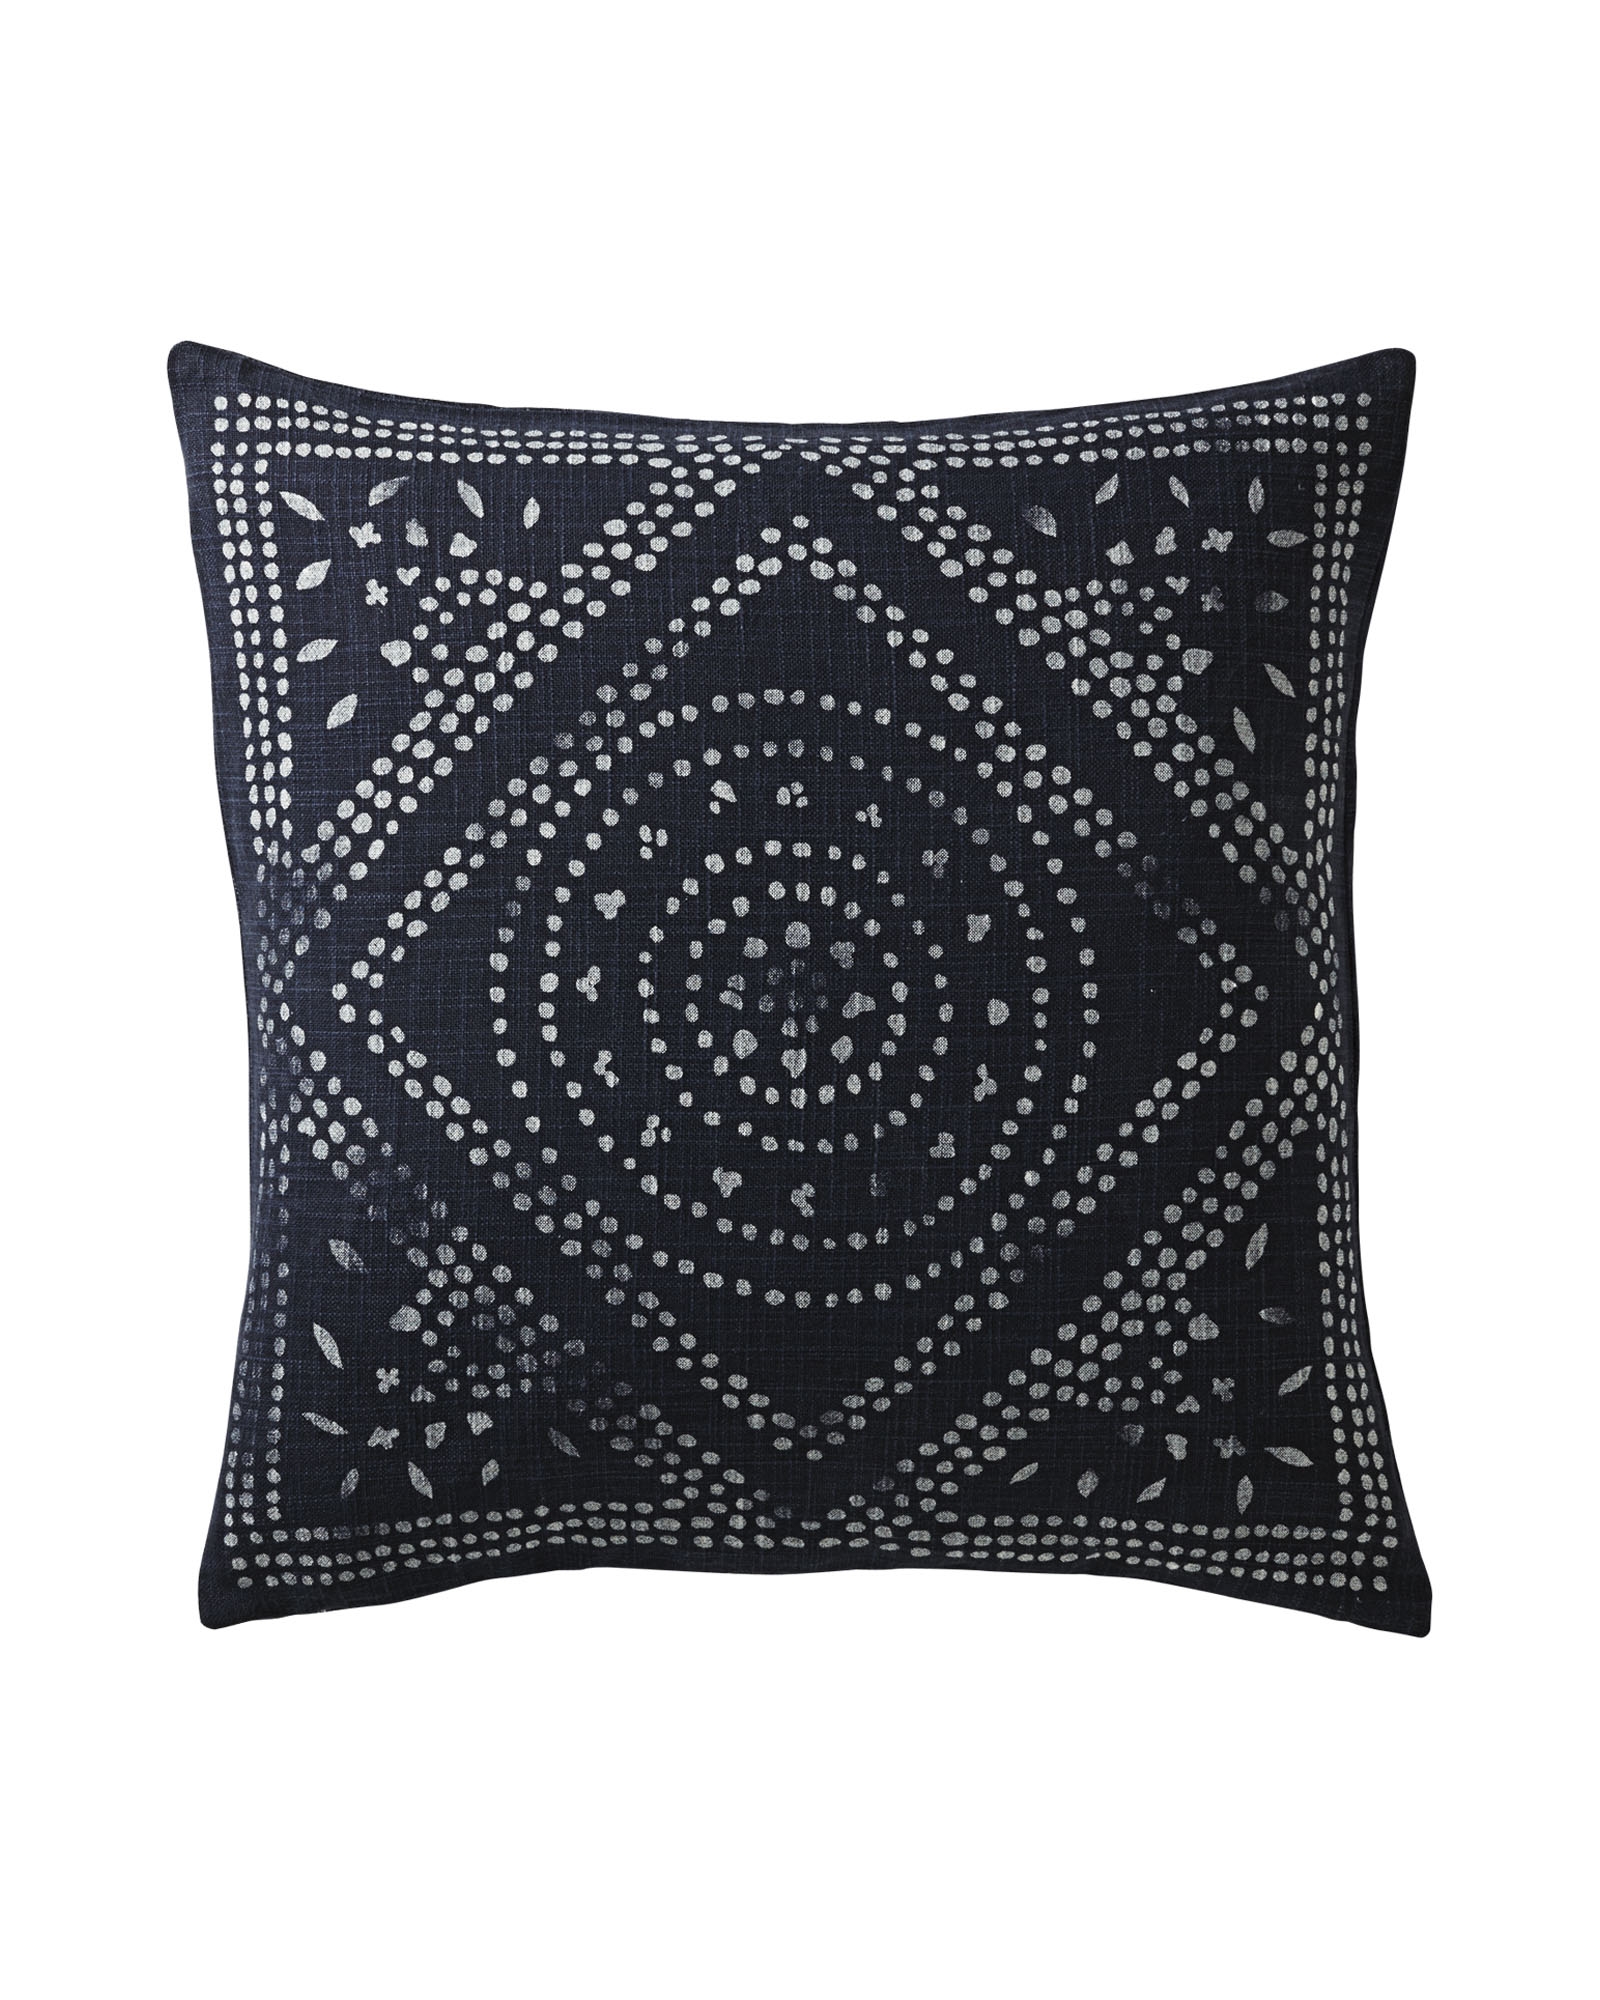 Camille Diamond Medallion Pillow Cover - 20"sq. - Insert sold separately - Image 0